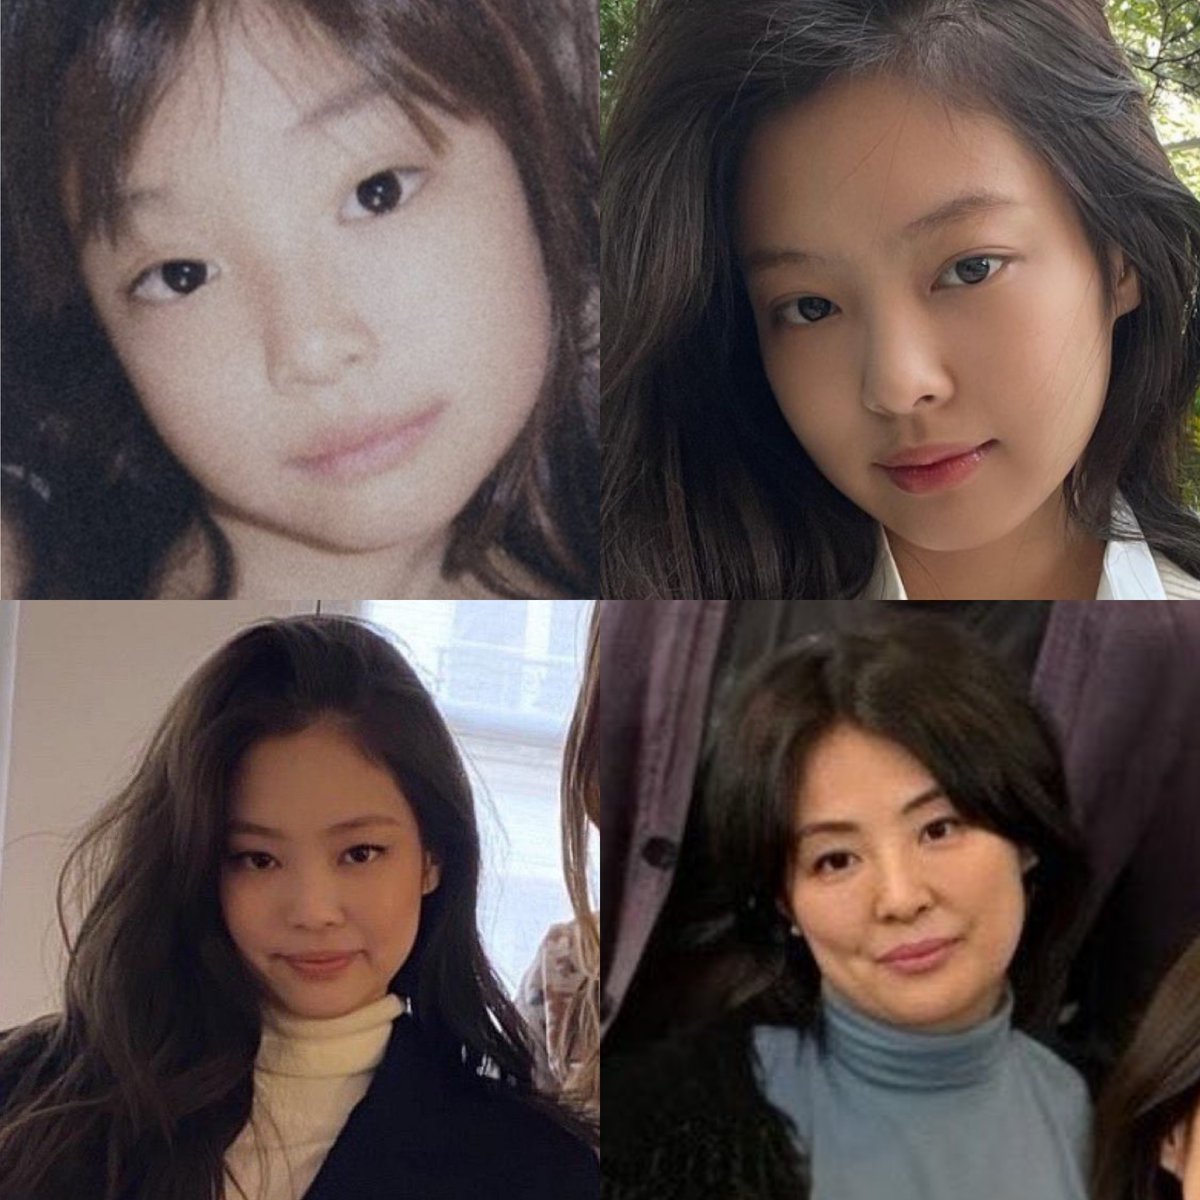 while others are thanking their plastic surgeons for their pretty faces, jennie is thanking her mother for her beautiful genes.